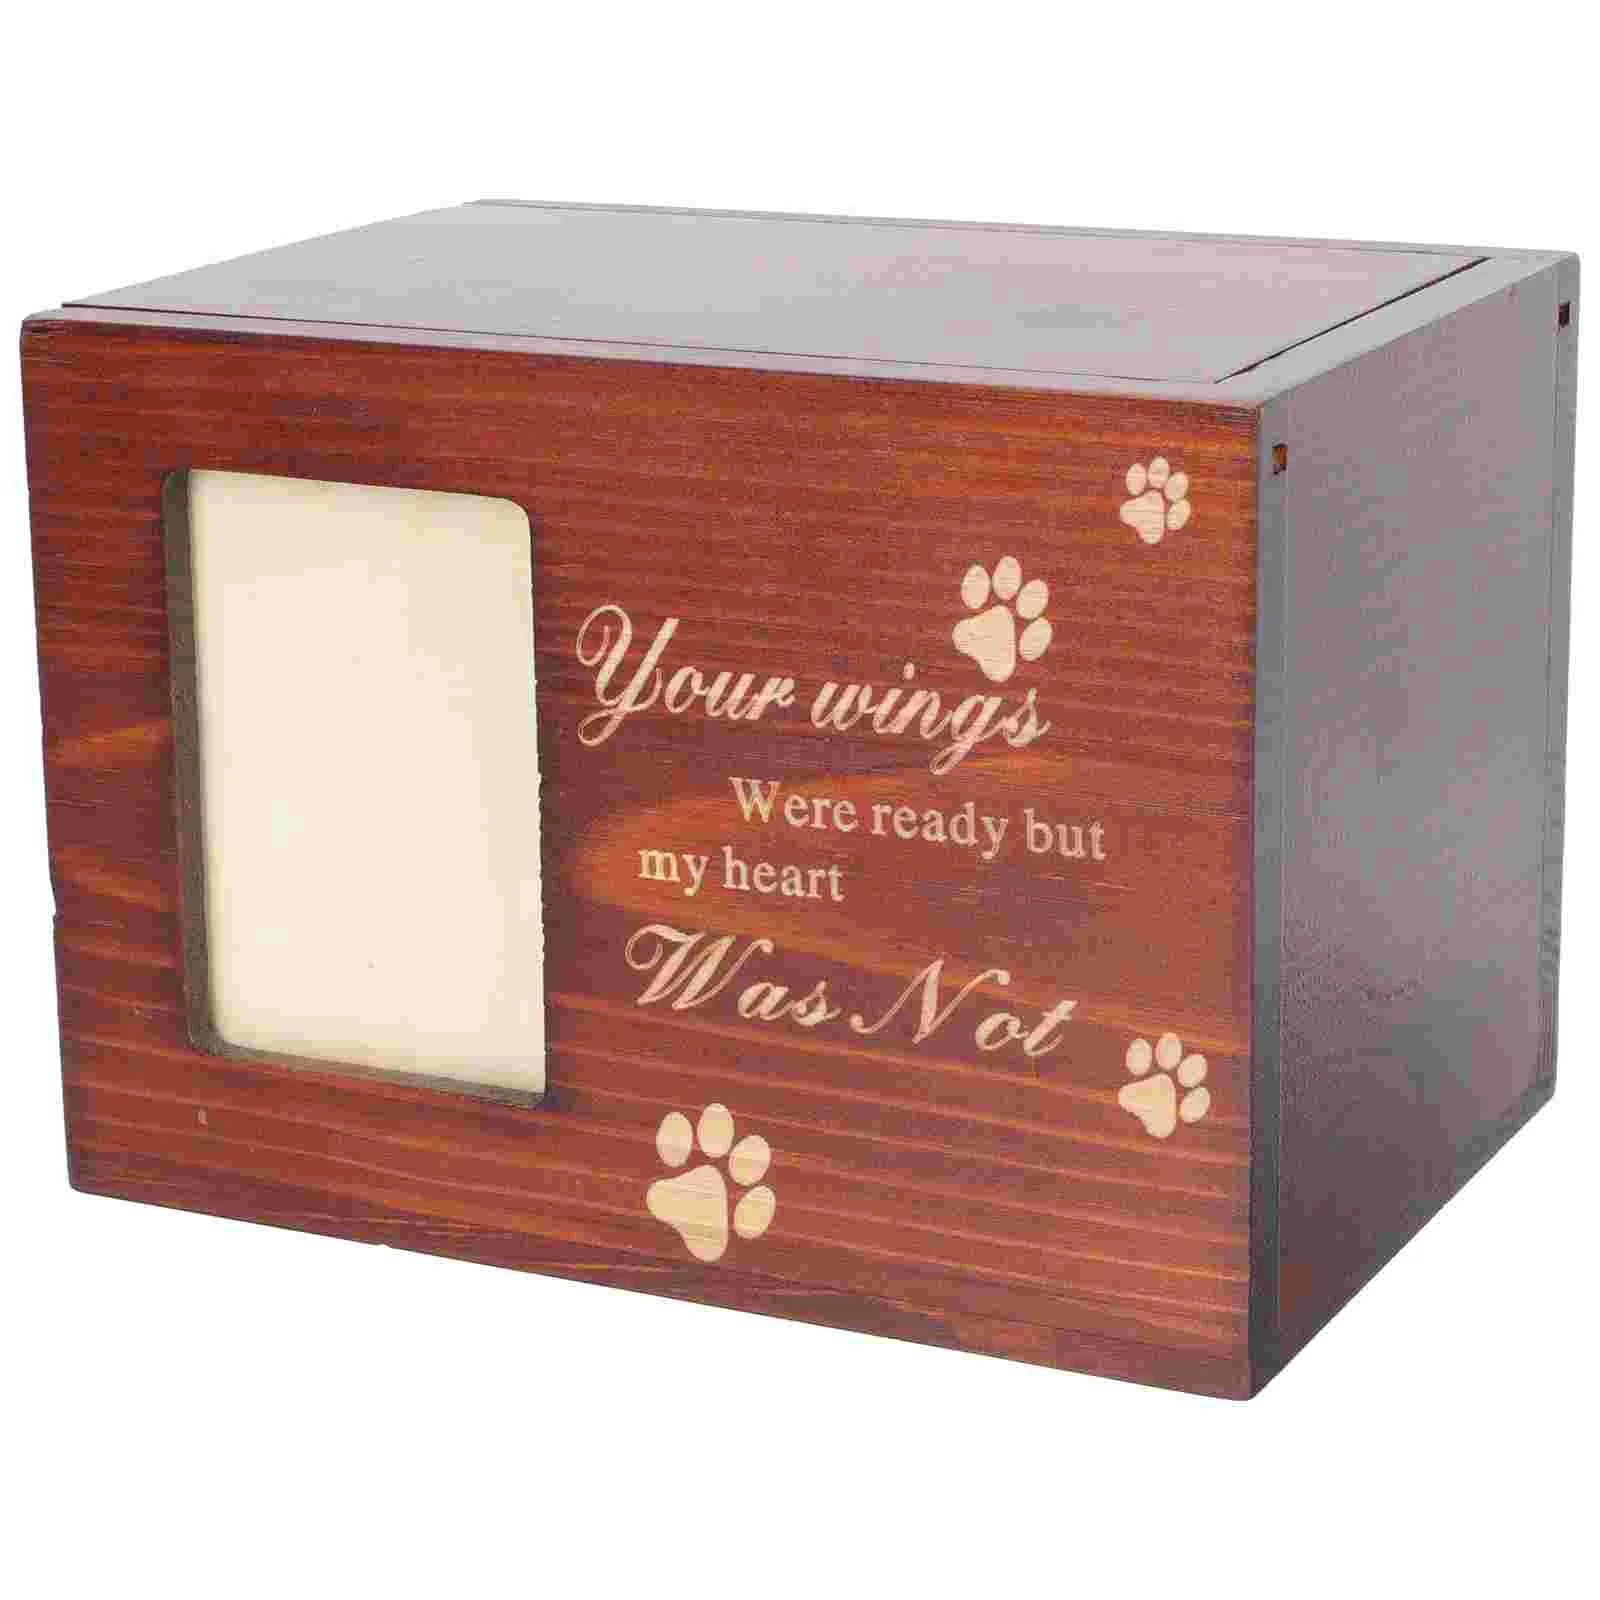 

Pet Urn Cats Urns Ashes Adult Stainless Steel Cremation Wooden Acrylic Dogs Cinerary Casket Funeral Accessory Small